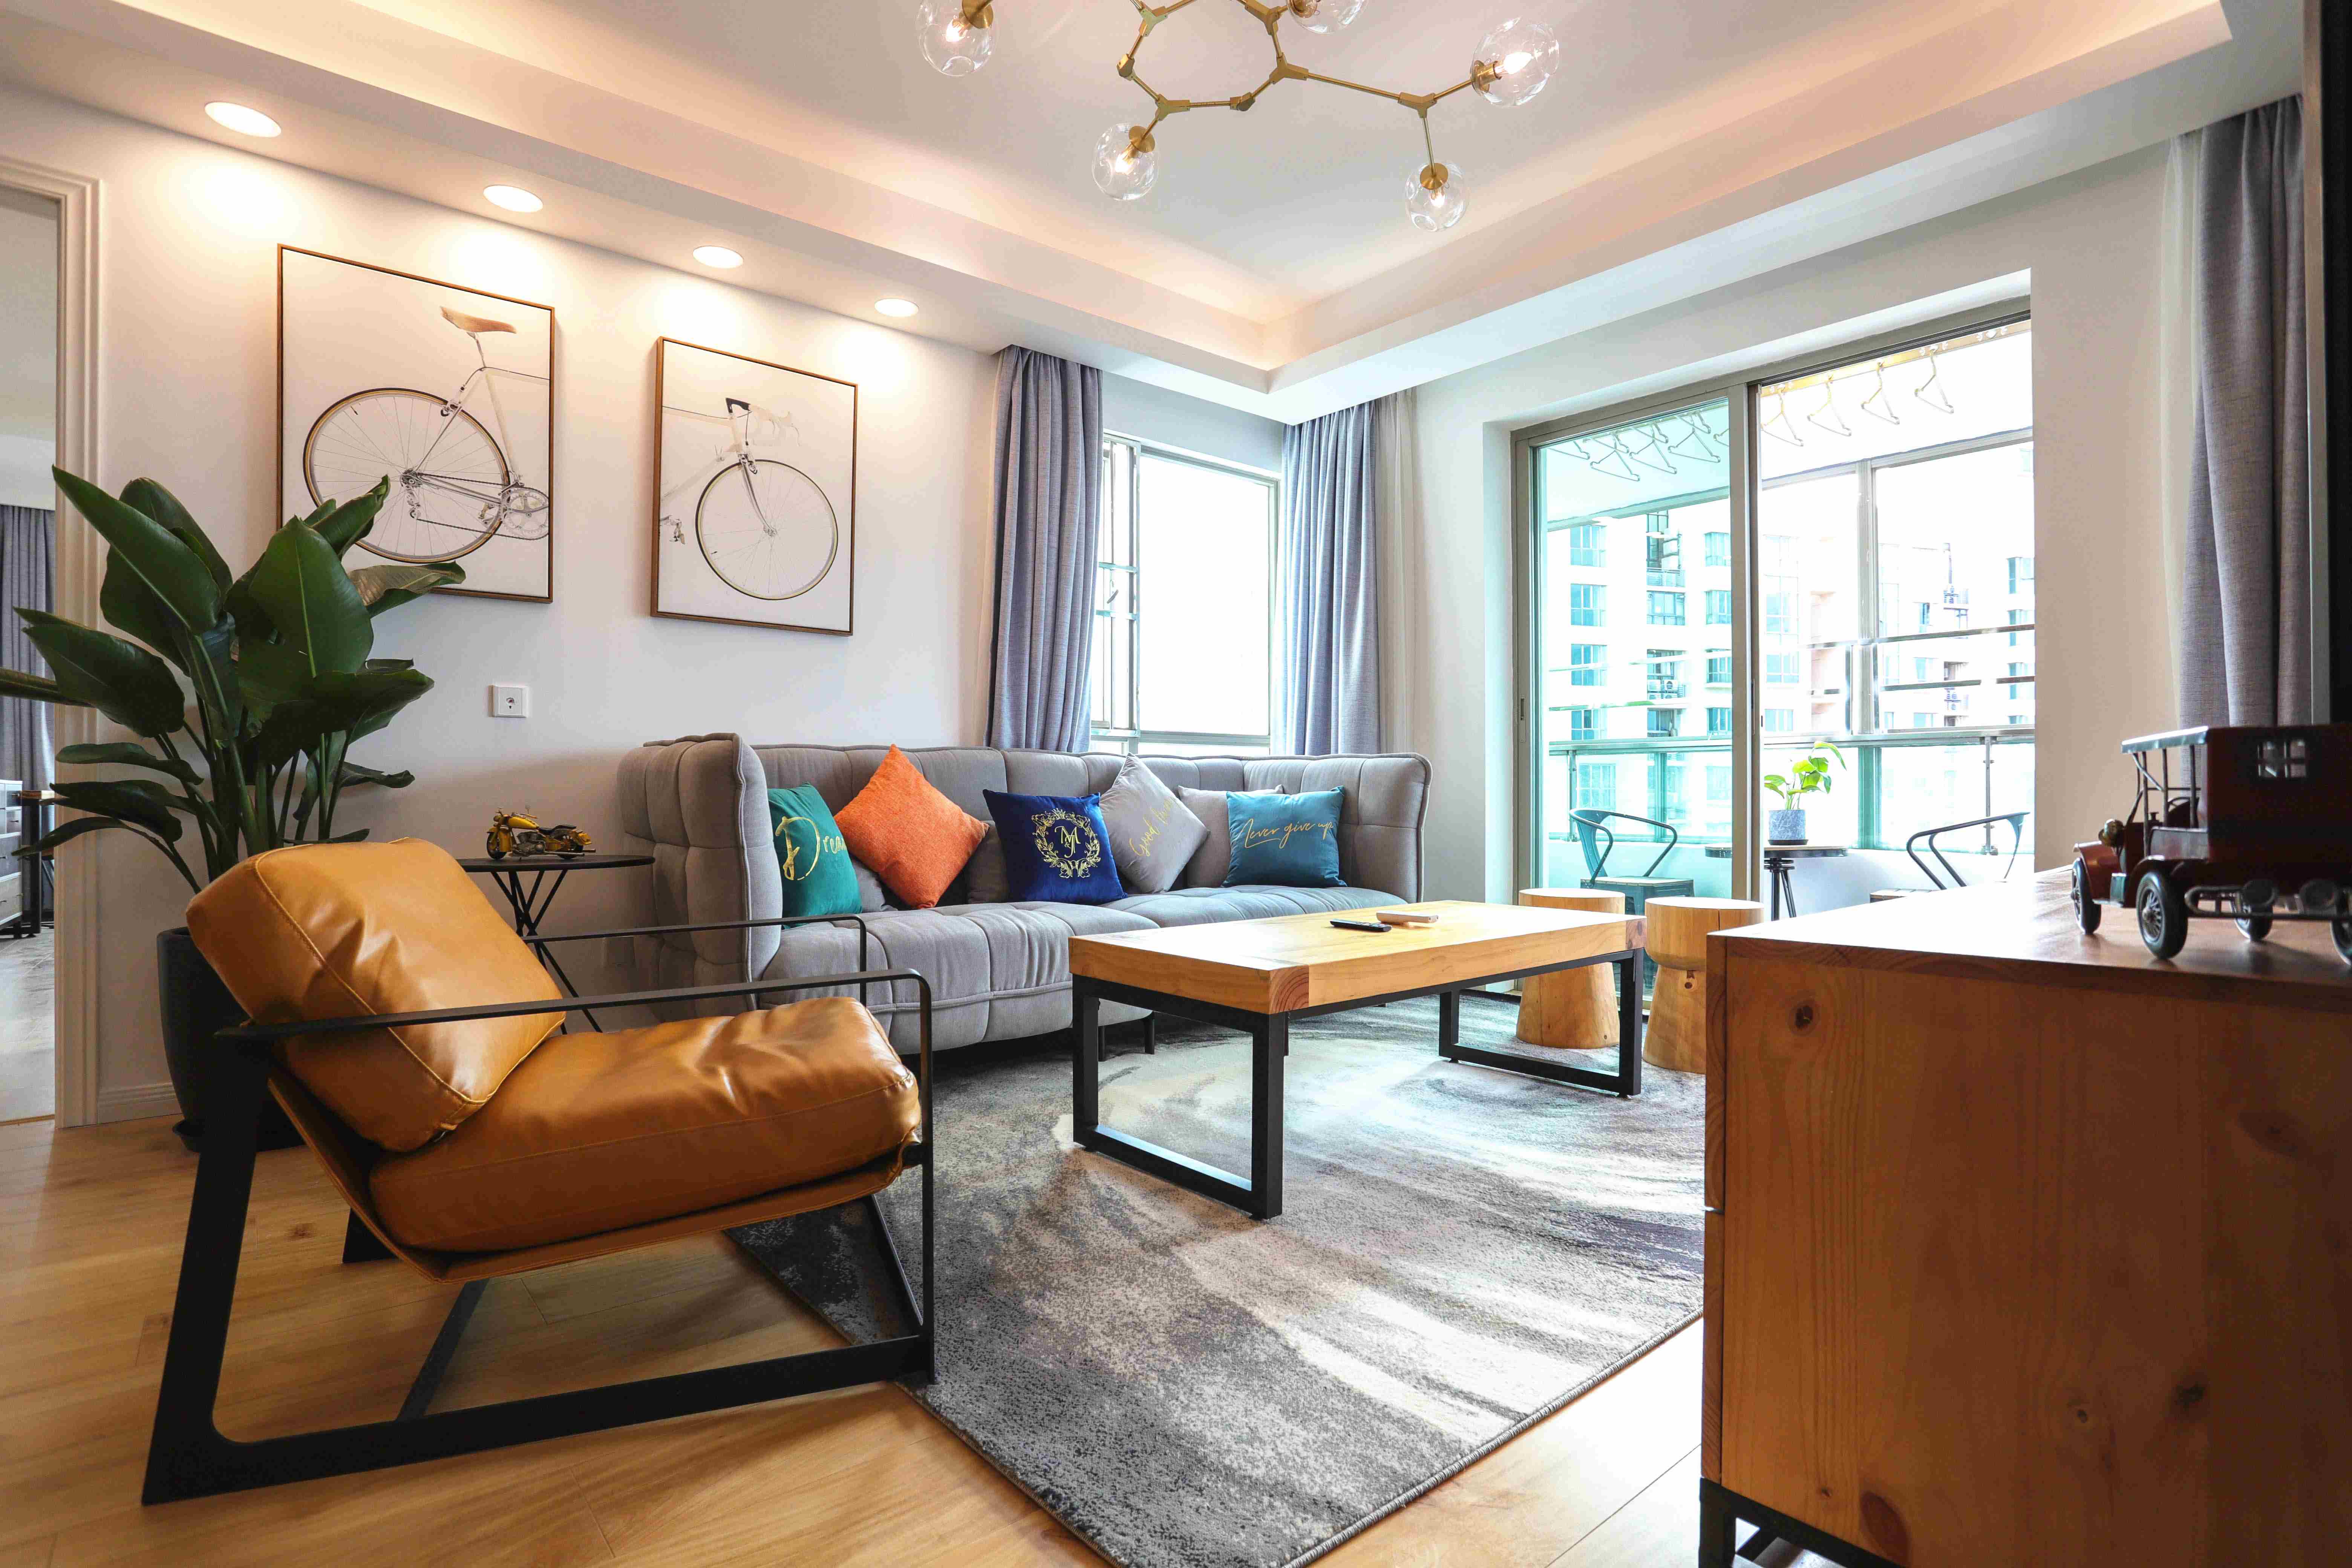 Comfortable living room New Modern Bright Spacious 2BR One Park Ave Apt for Rent in Shanghai Jing’an Near LN 2/7